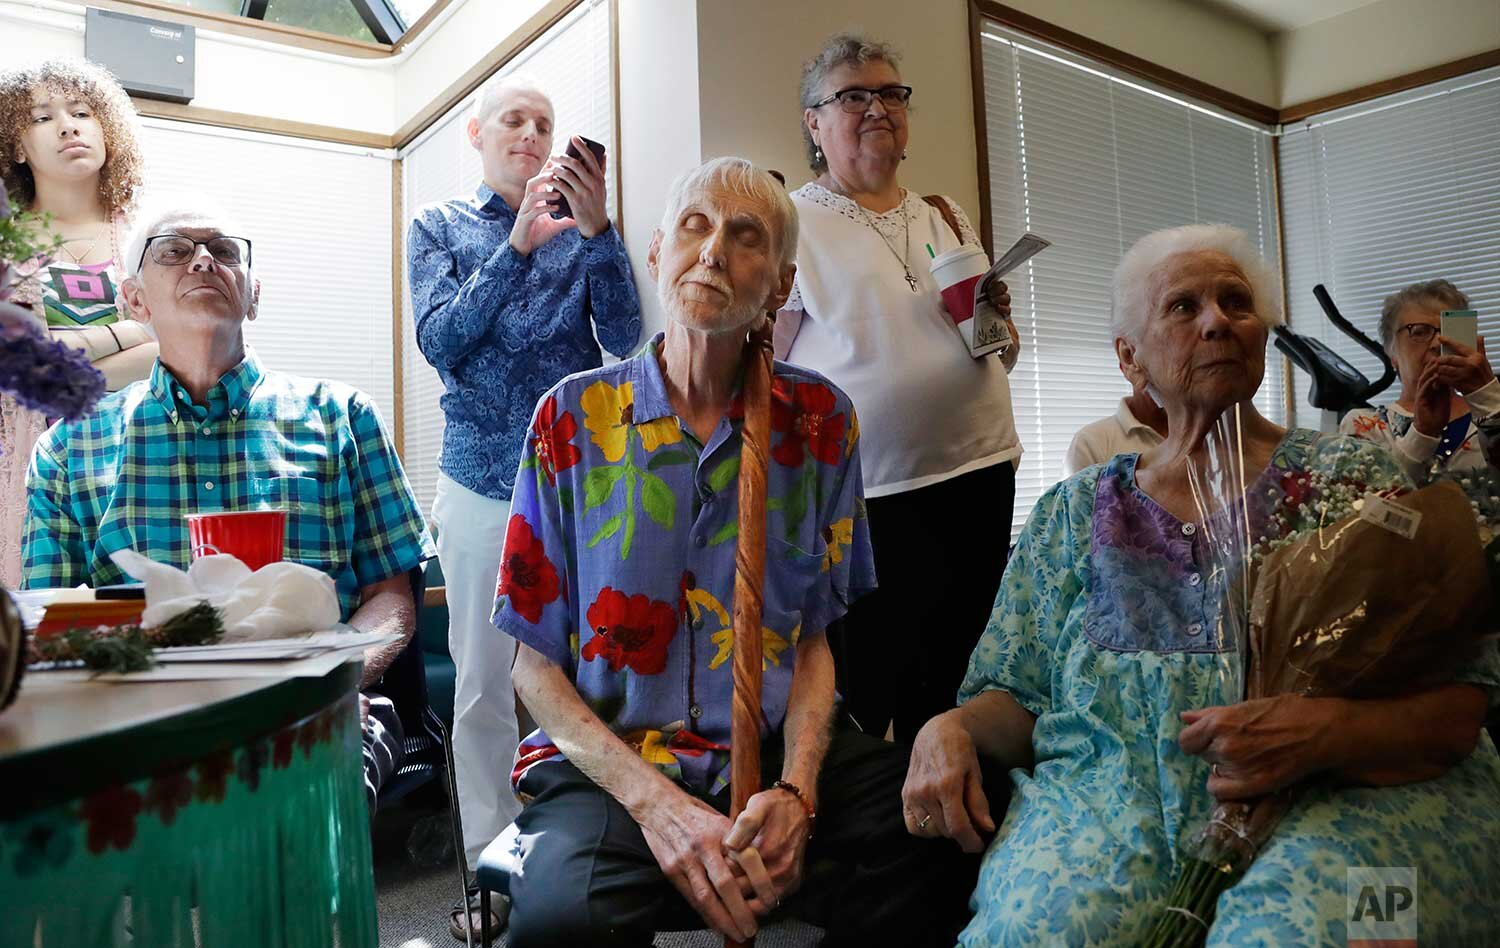  In this May 10, 2019, photo, Robert Fuller, center, leans on his walking stick and closes his eyes as he listens to music at a party in his honor in Seattle. (AP Photo/Elaine Thompson) 